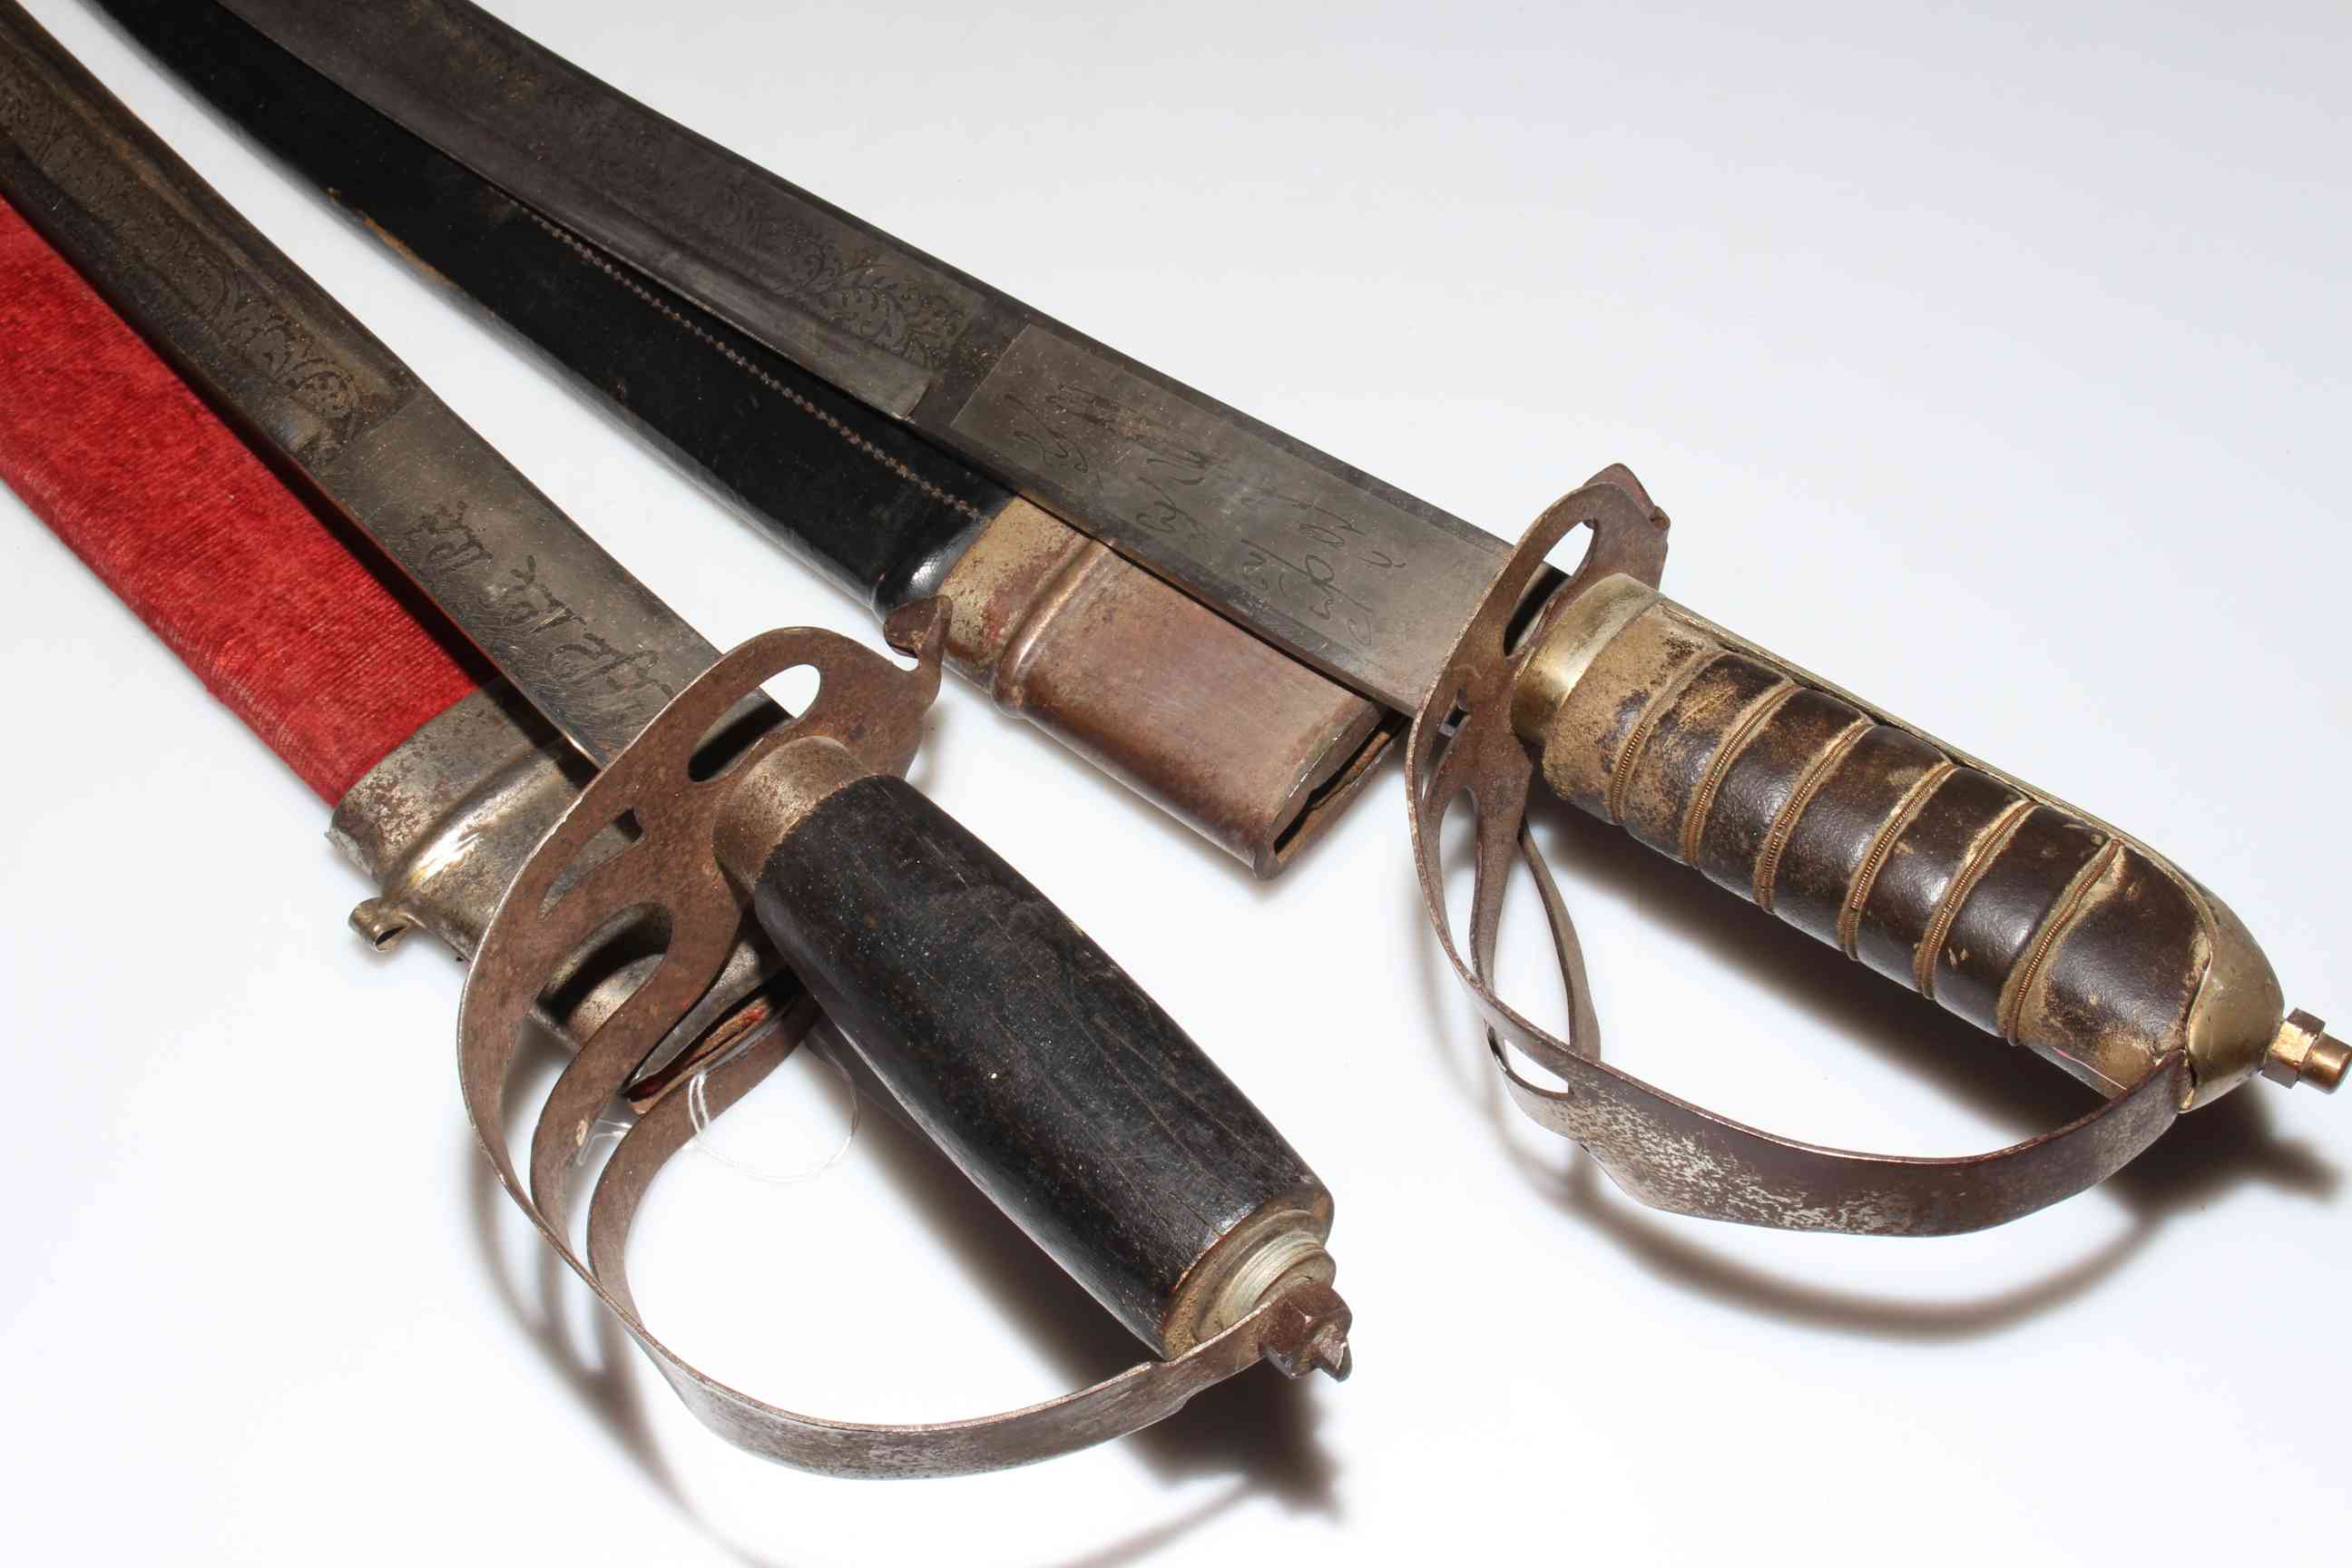 Three ornamental dress swords and scabbards. - Image 4 of 5